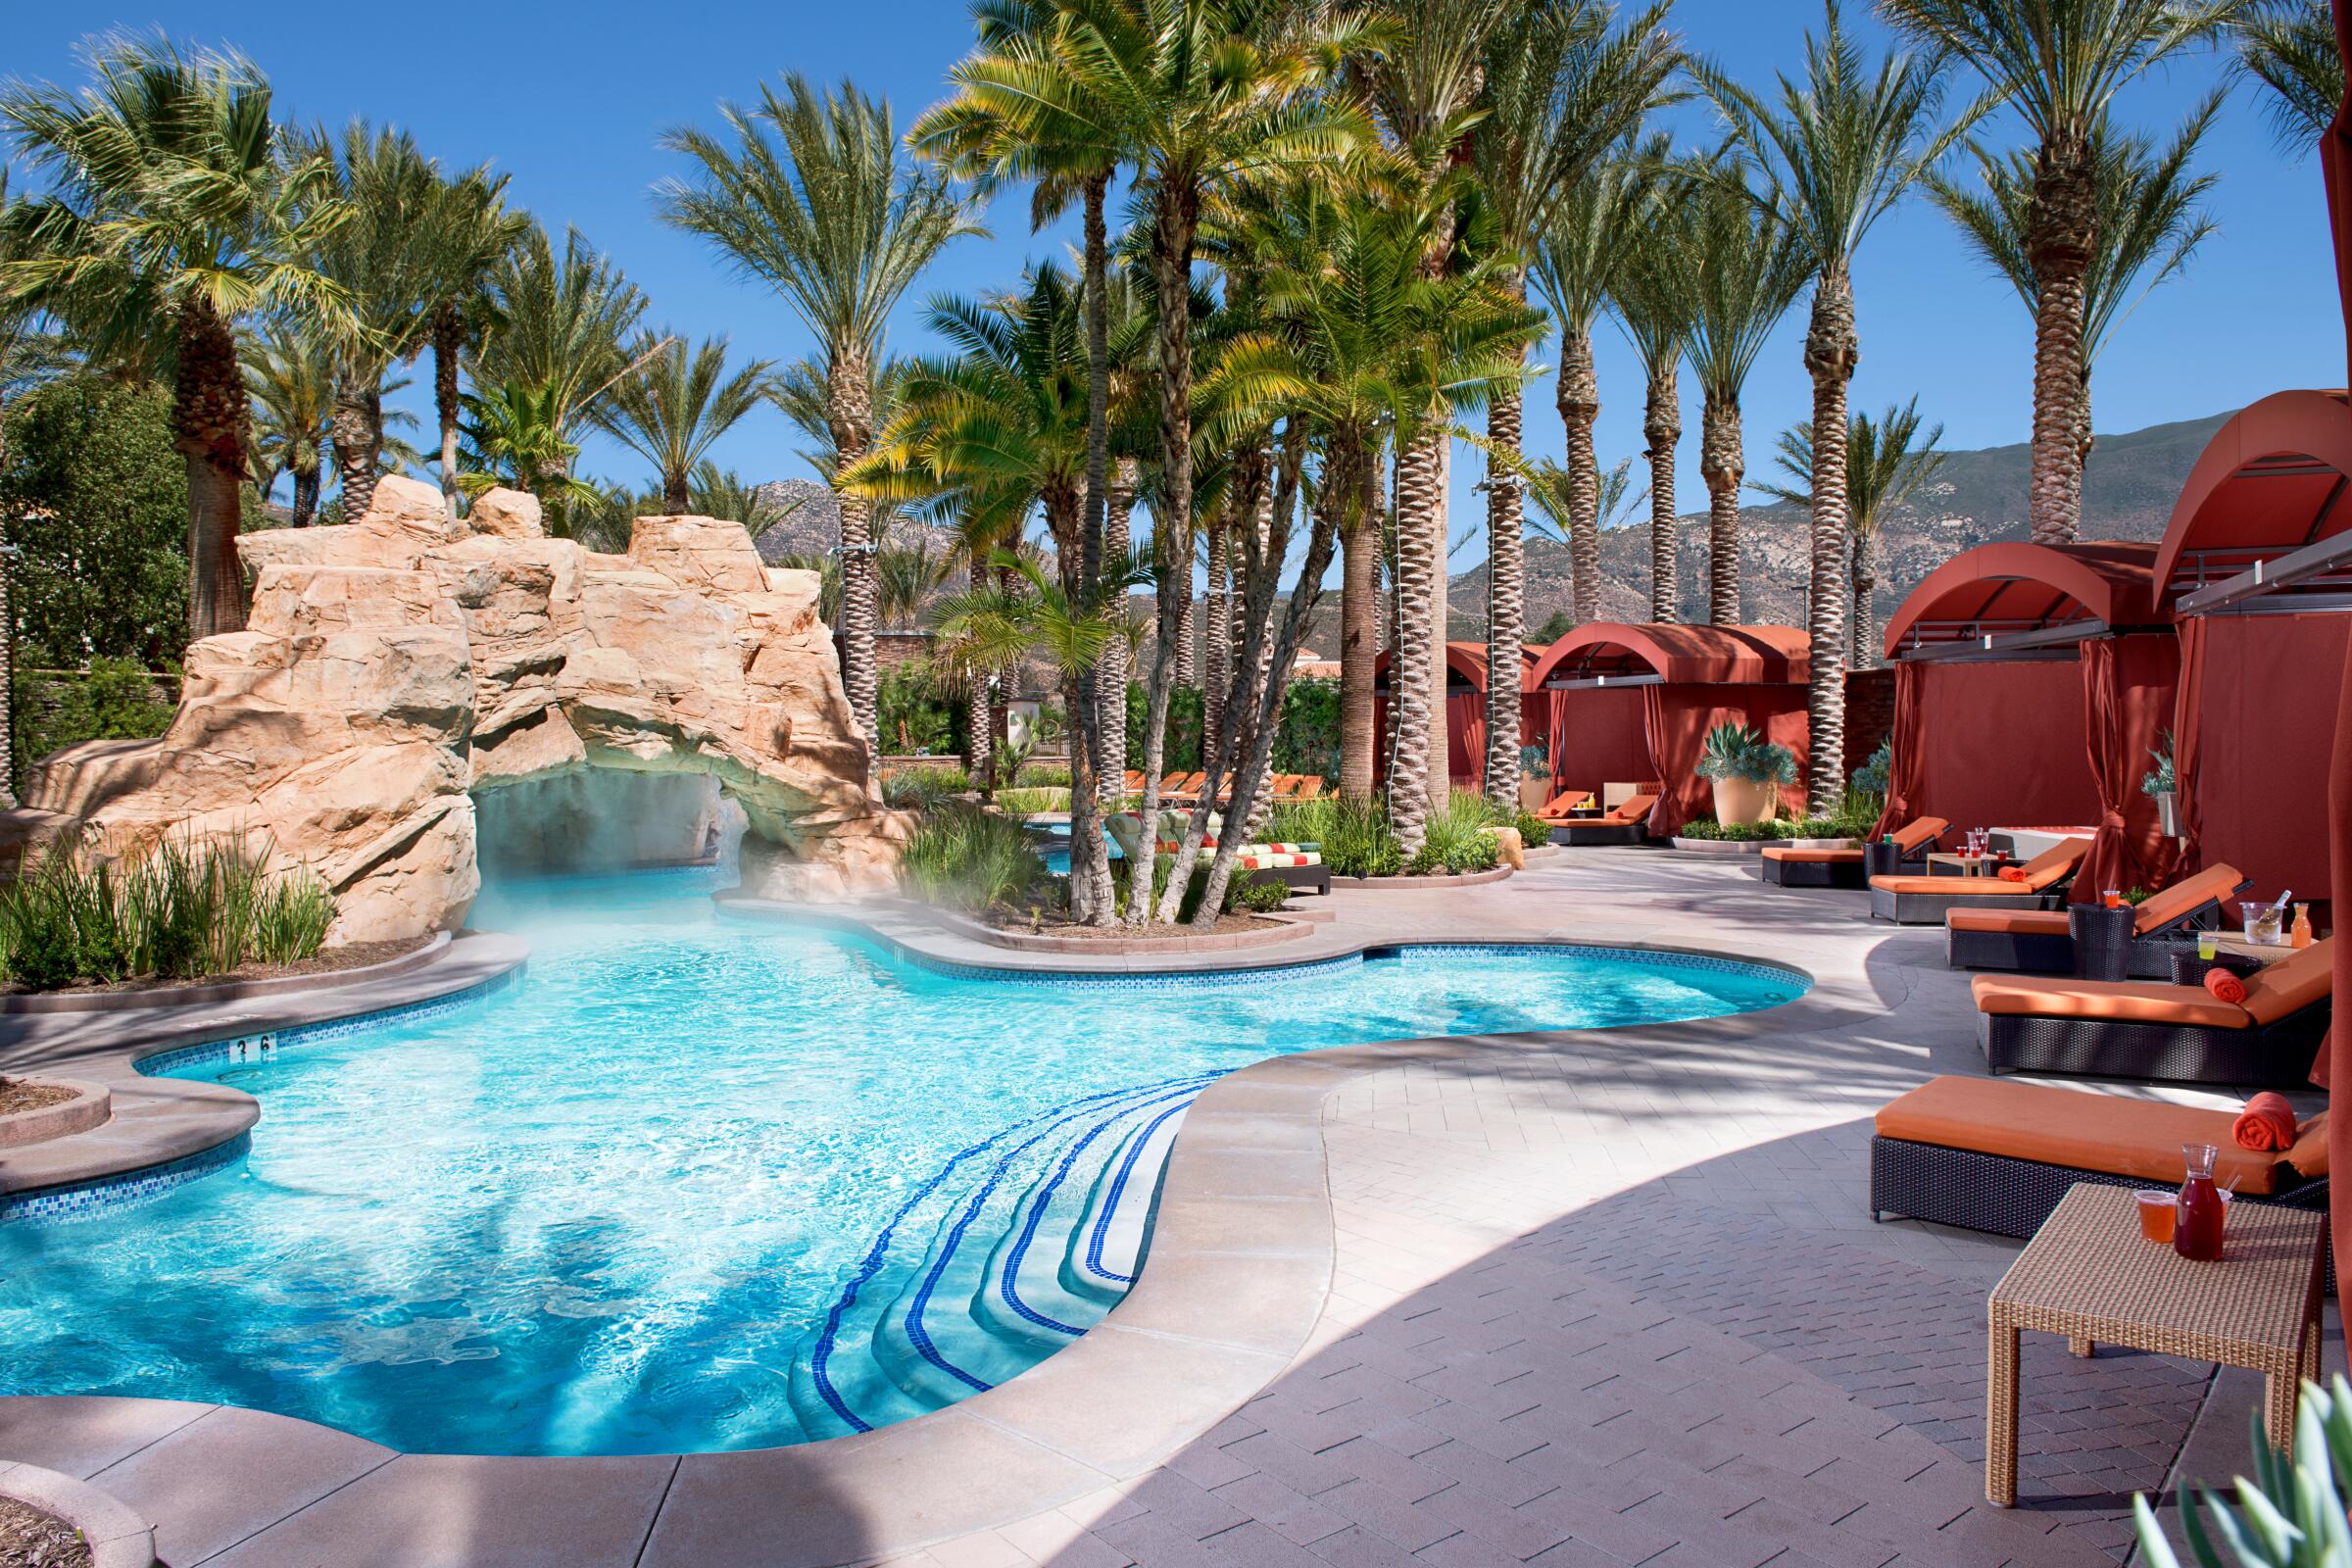 The grotto area of the lazy river at Harrah's Resort Southern California. It also features cabanas and daybeds.